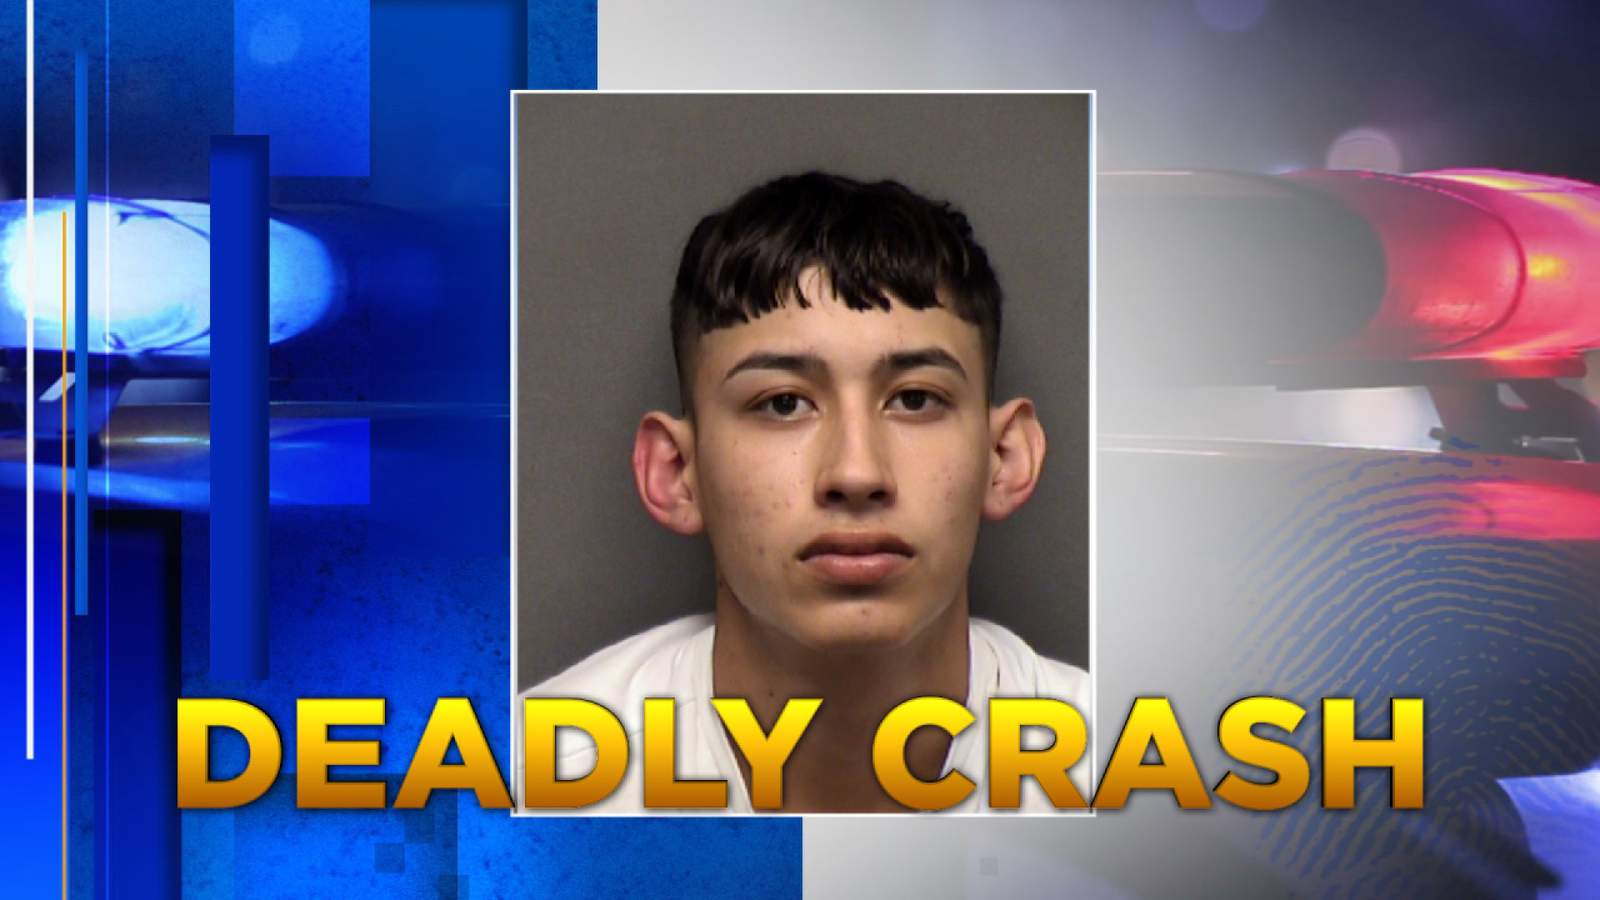 Man, 18, indicted on manslaughter, aggravated assault with deadly weapon in New Year’s Day crash, DA’s office says